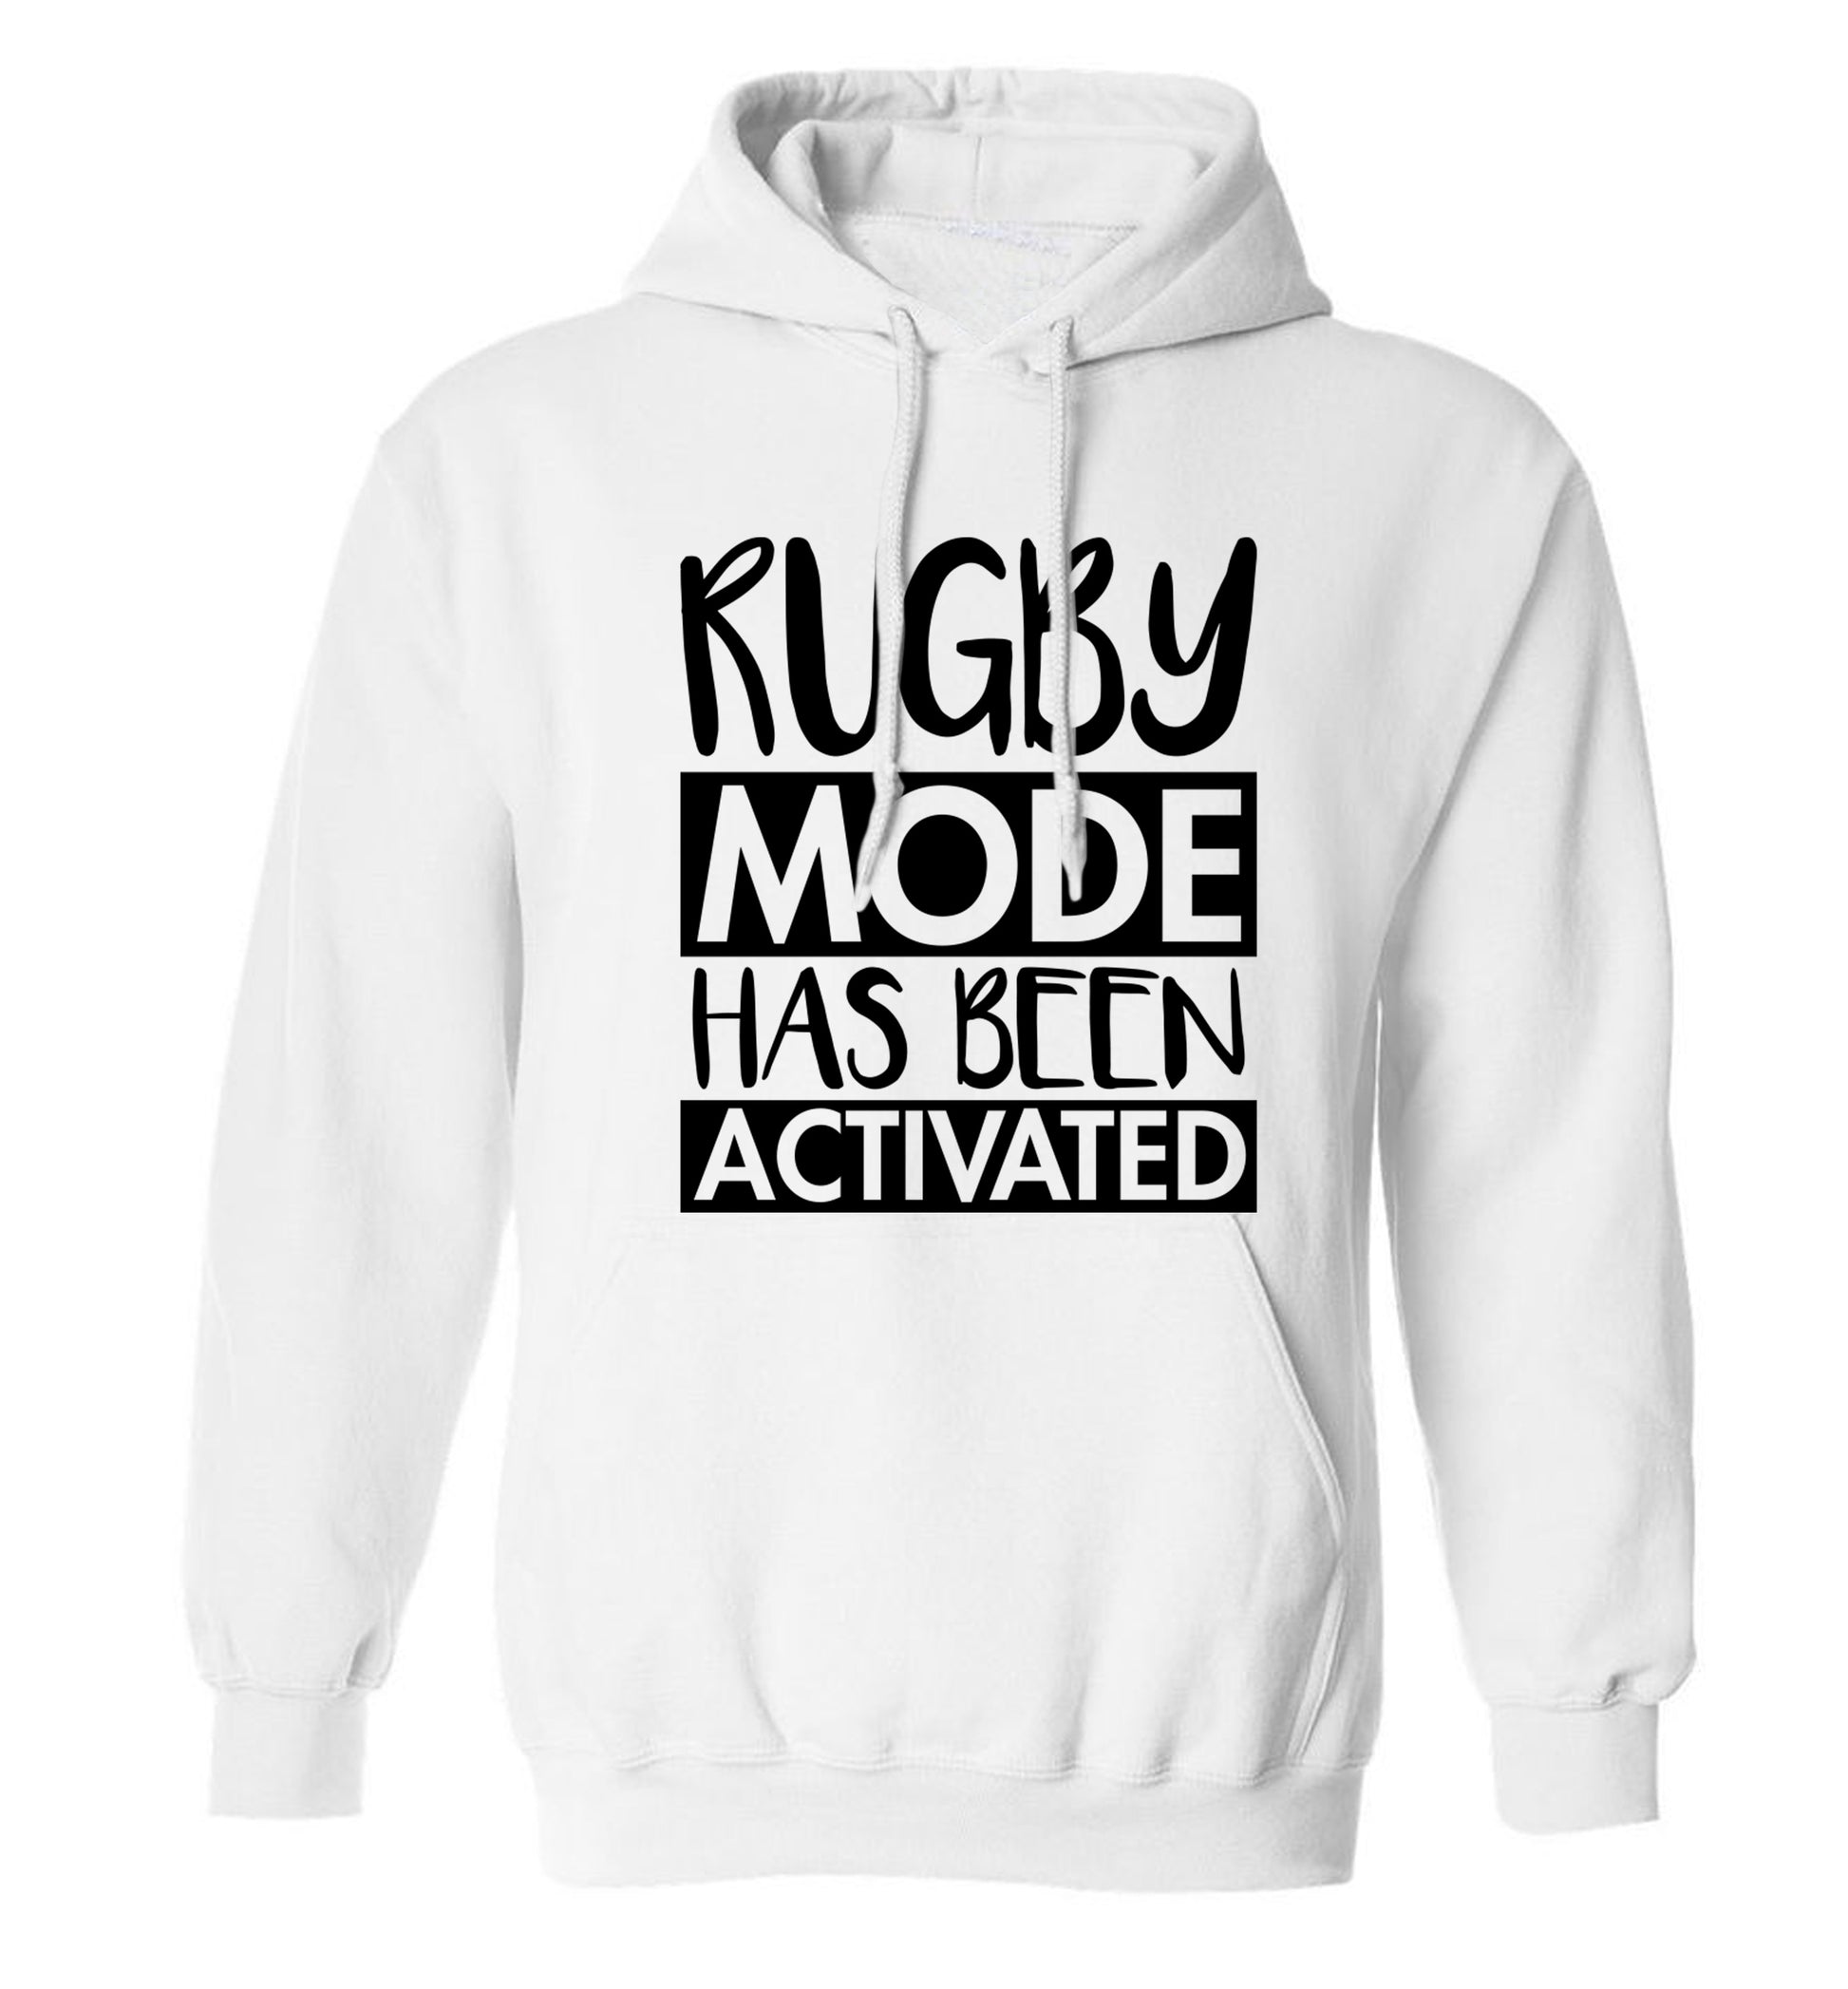 Rugby mode activated adults unisex white hoodie 2XL